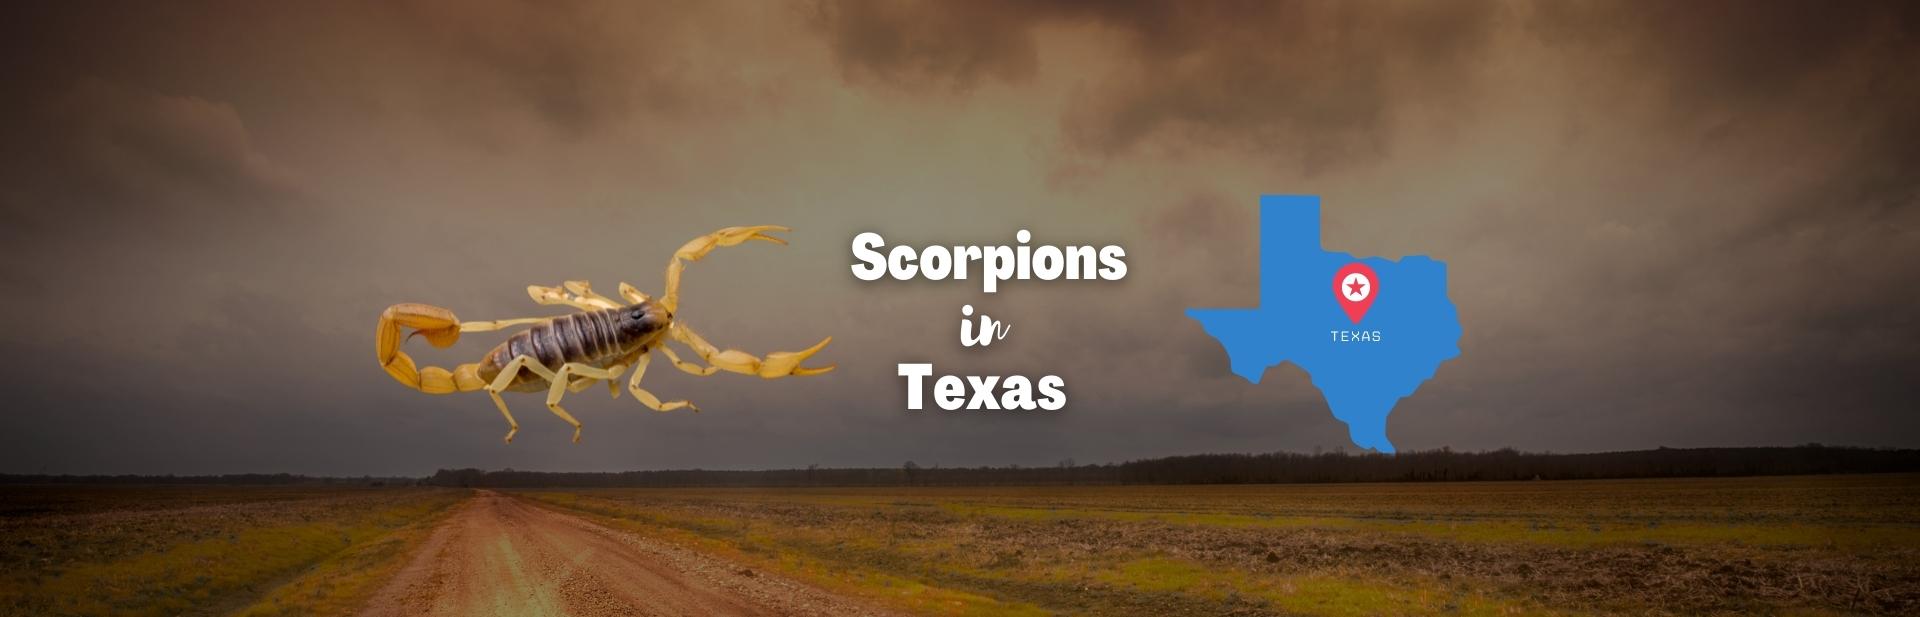 Scorpions in Texas: All About Texas’s Dancing Arachnids